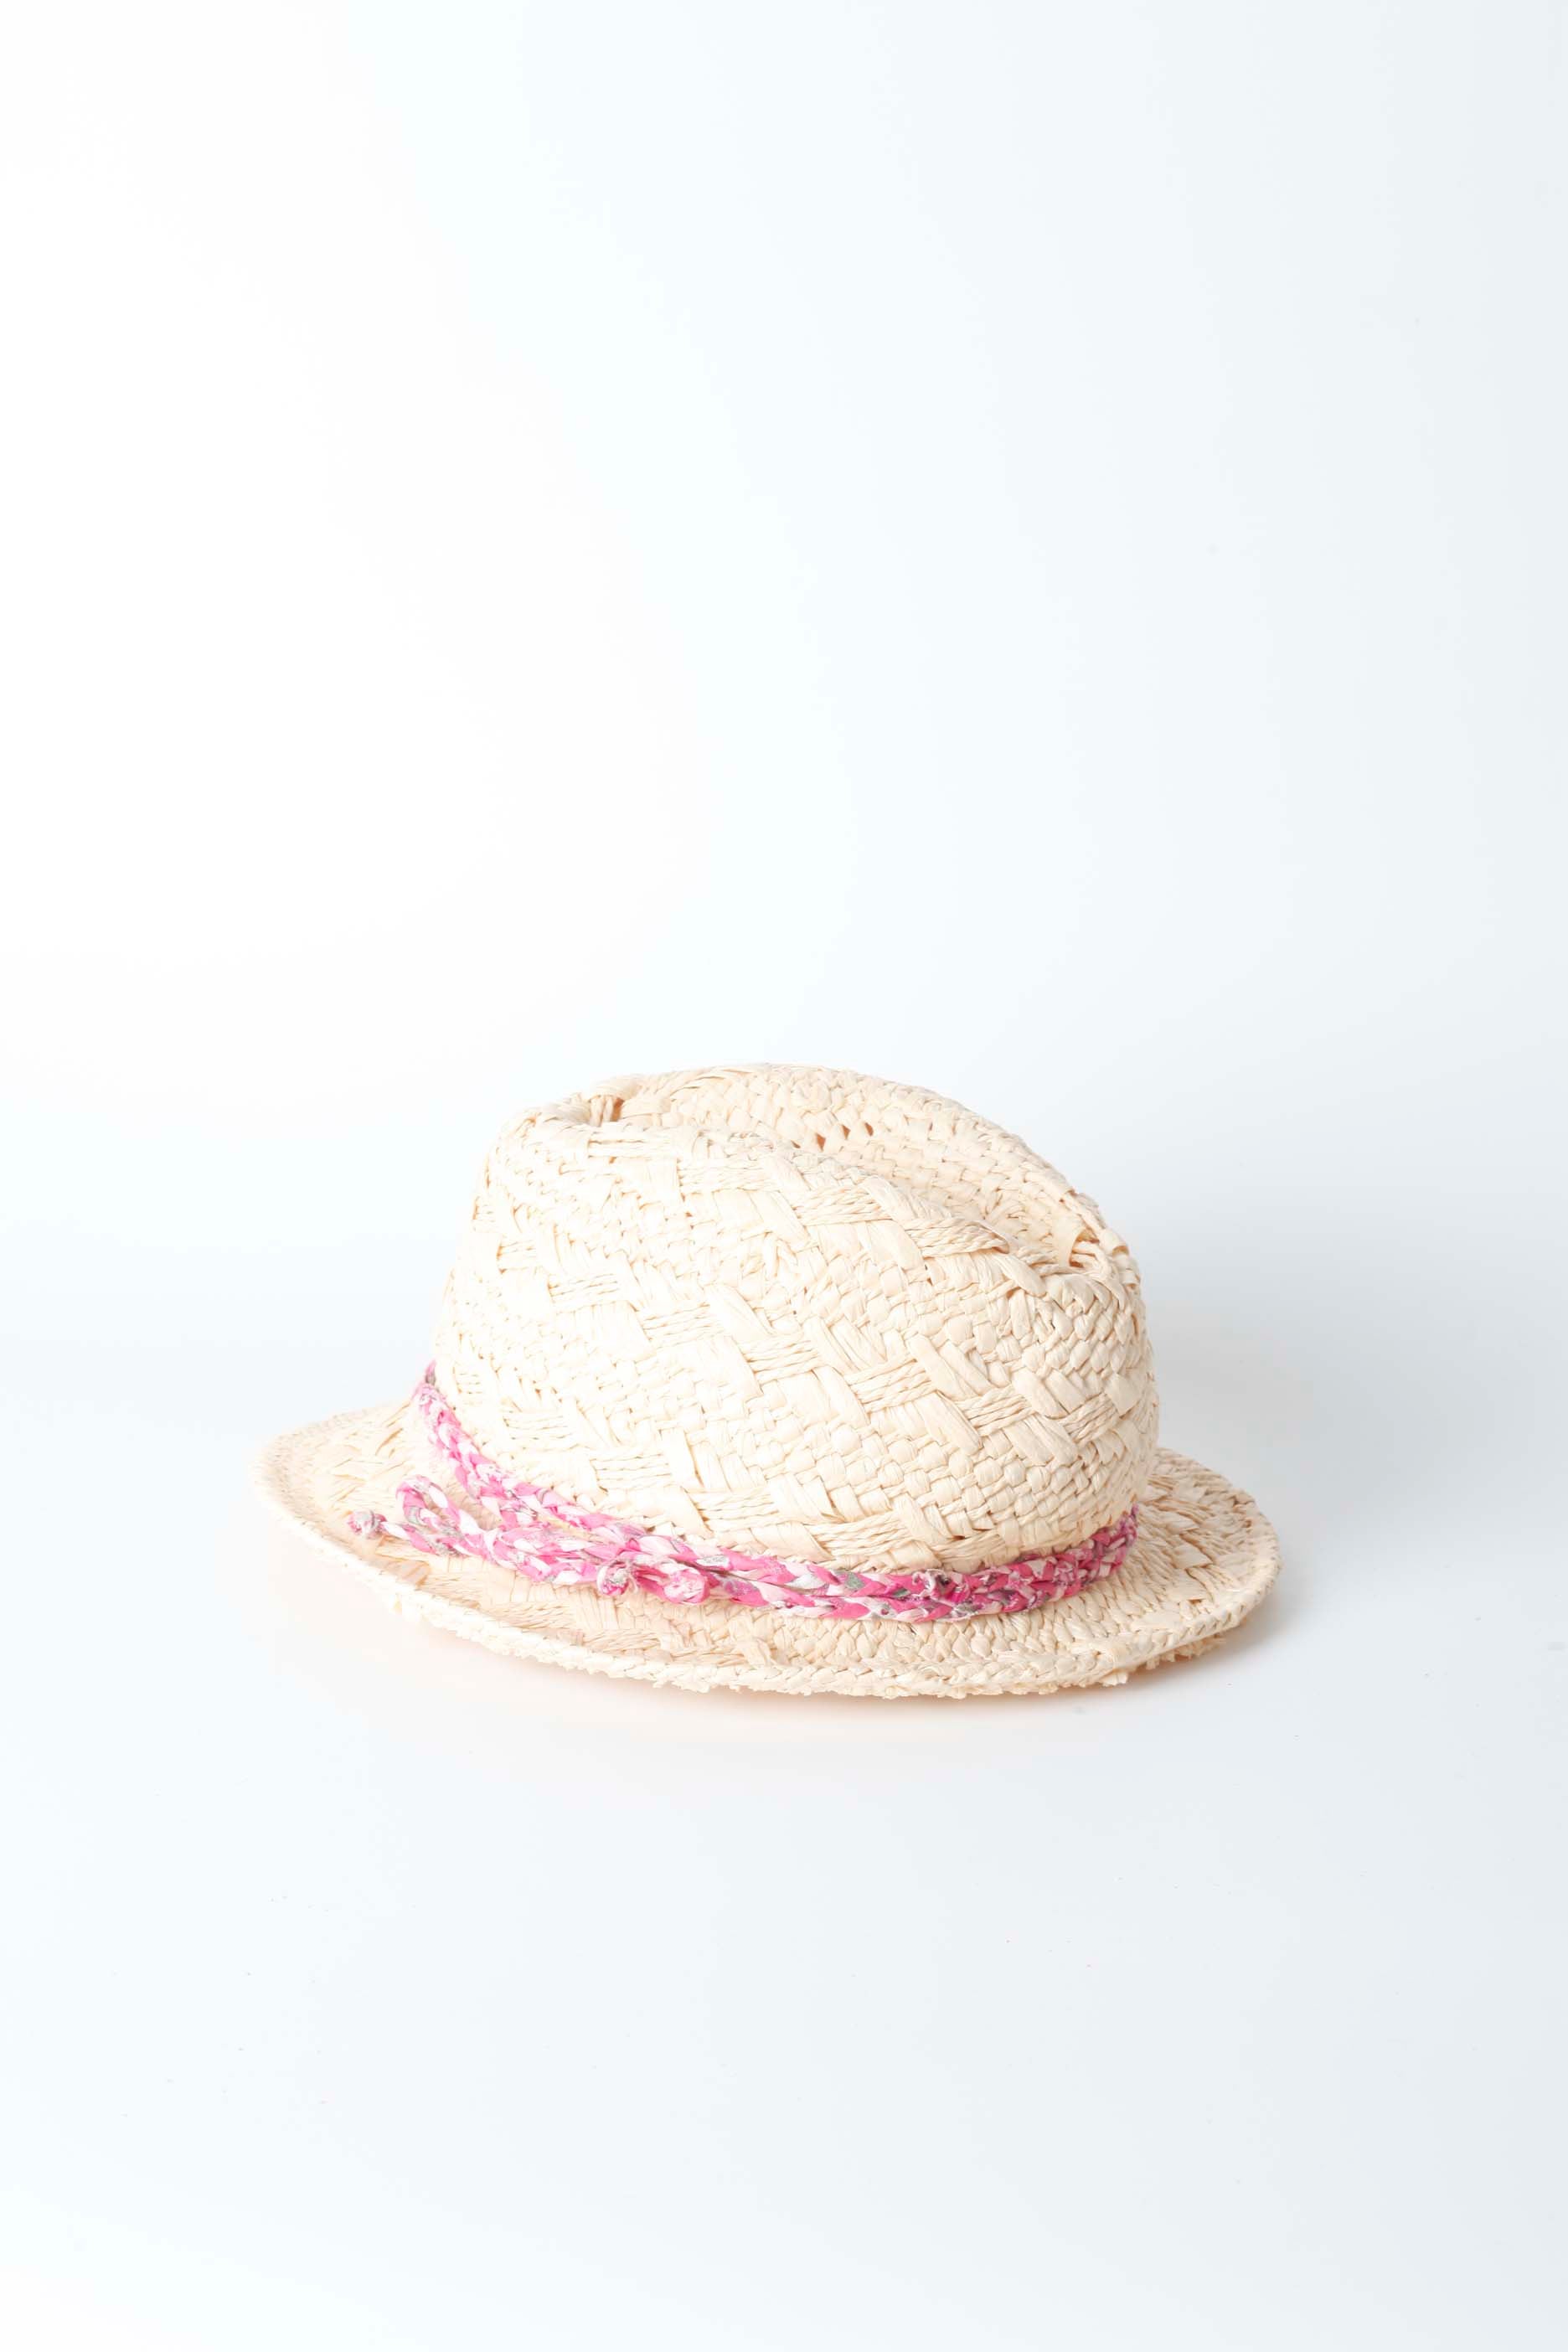 Girls Straw Hat with Pink Ribbon